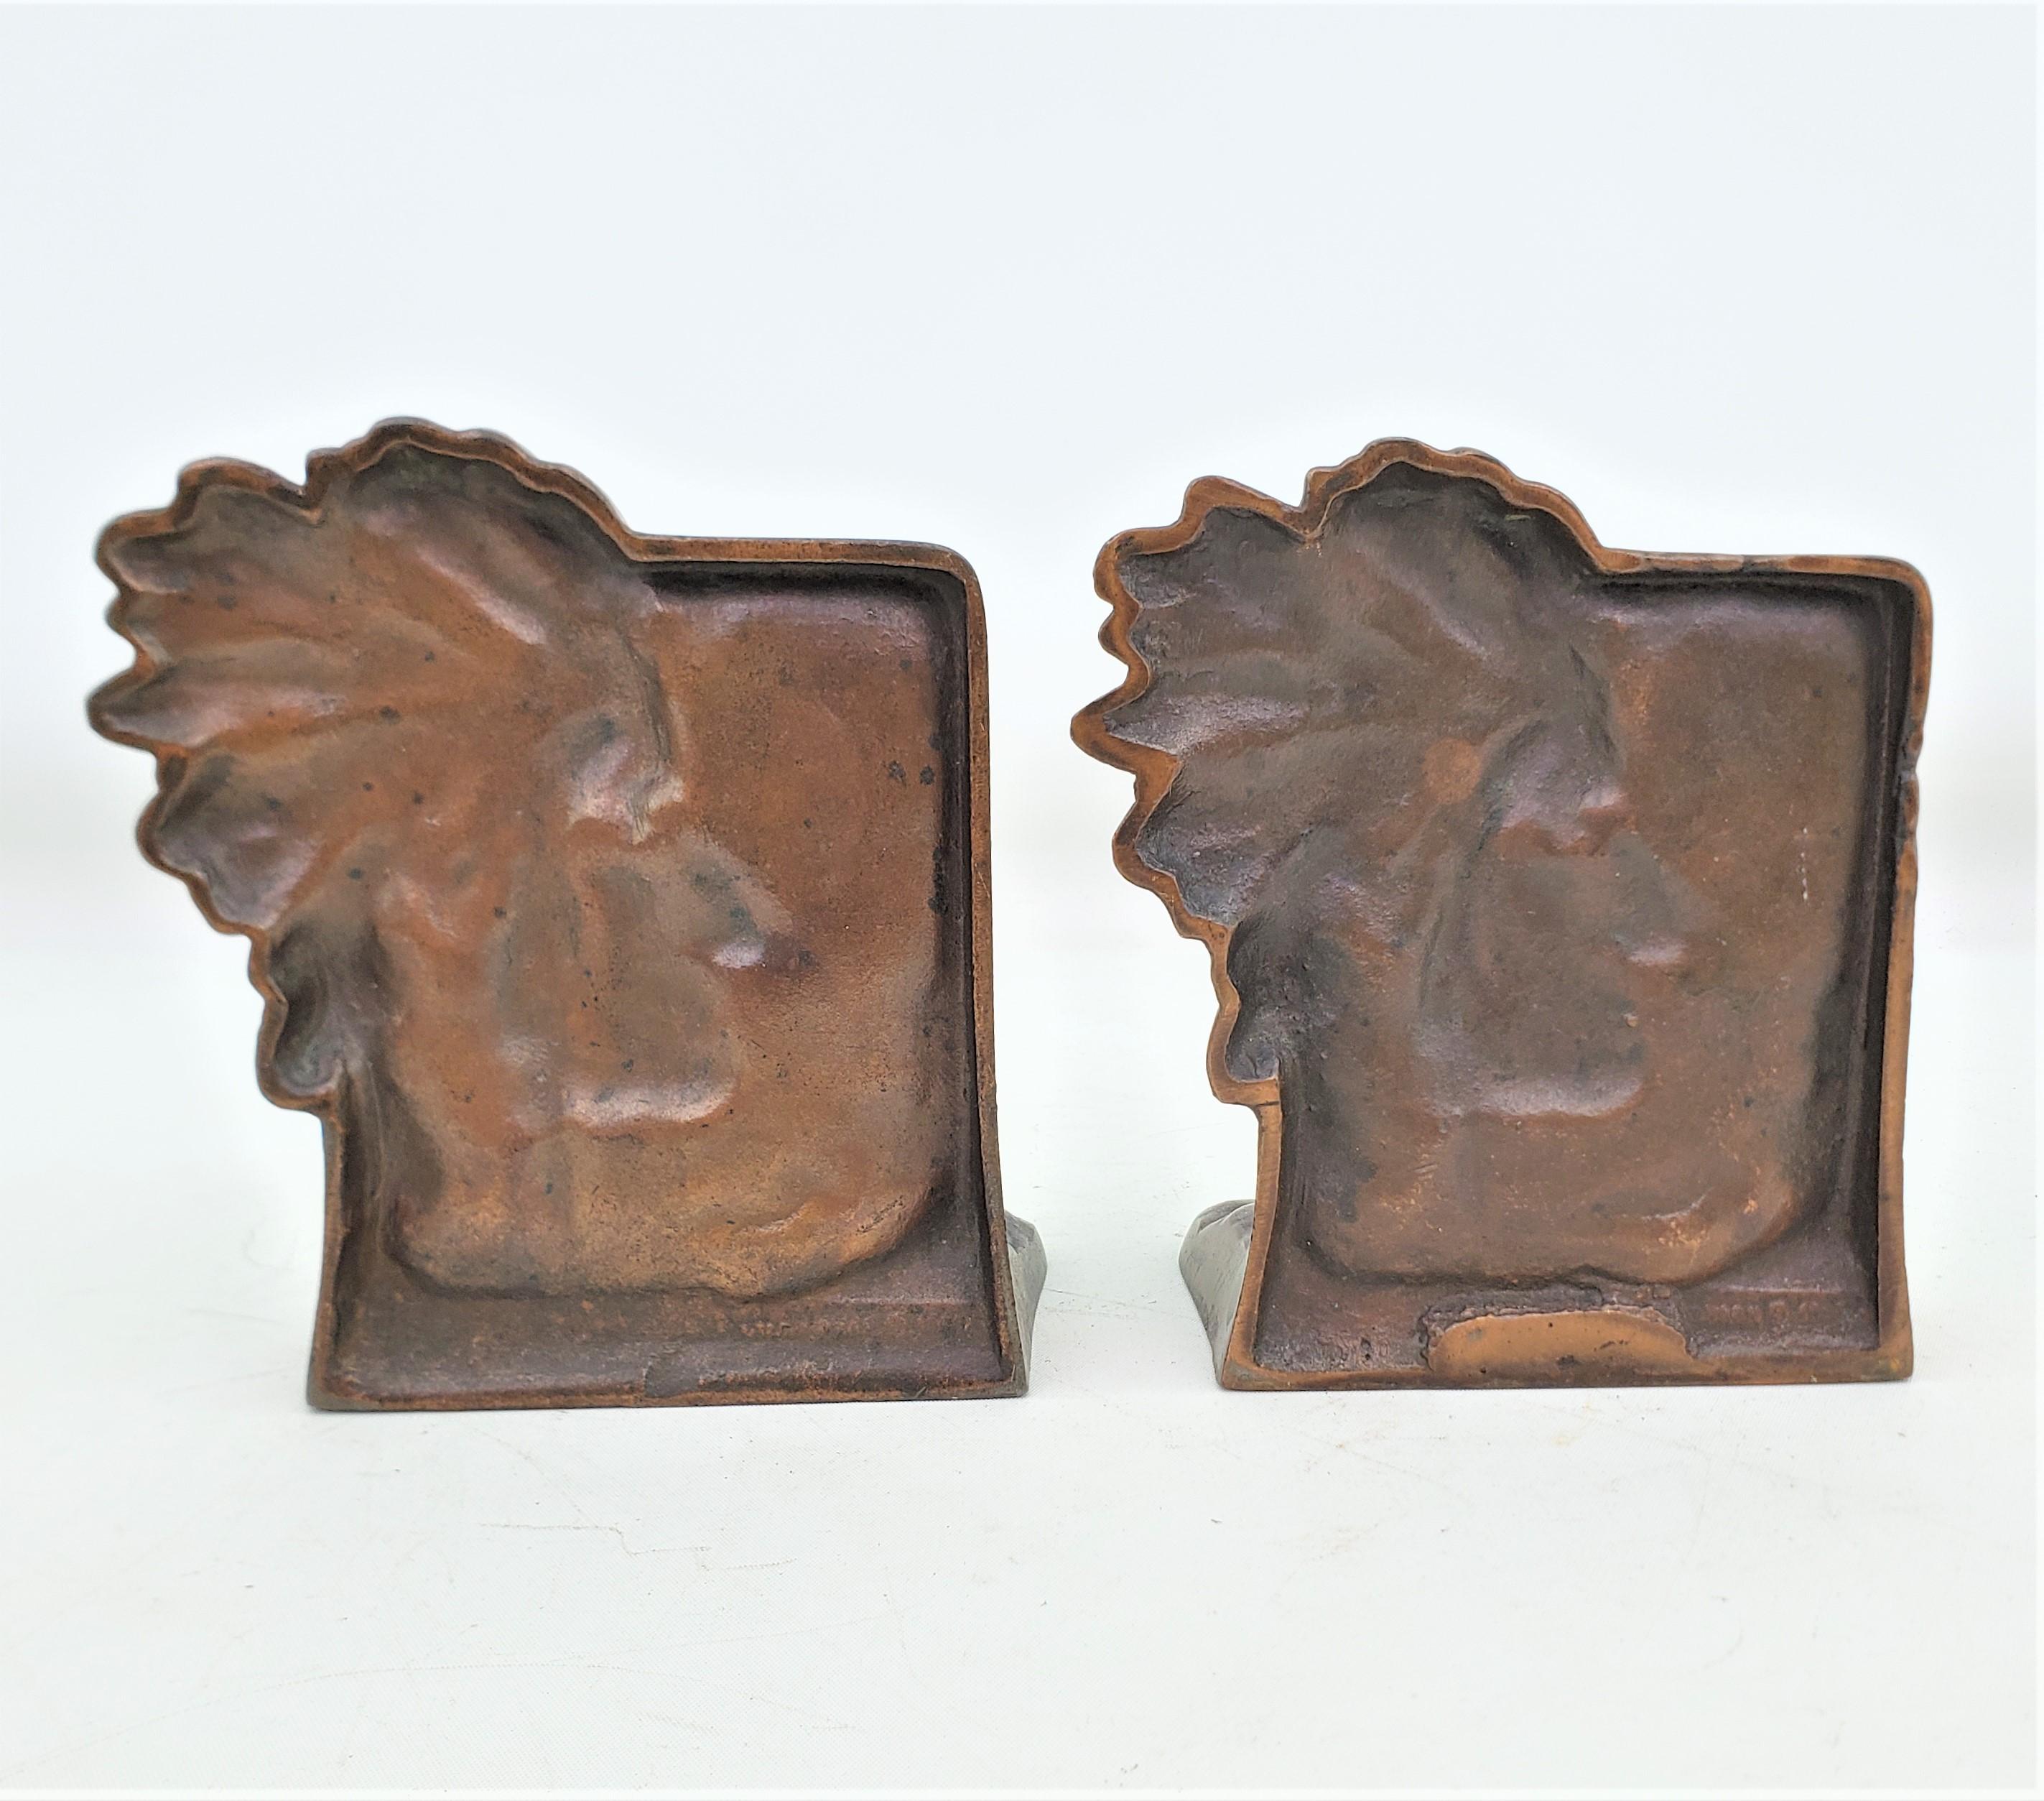 Antique Art Deco Cast & Patinated Bookends Depicting an Indigenous Warrior For Sale 1